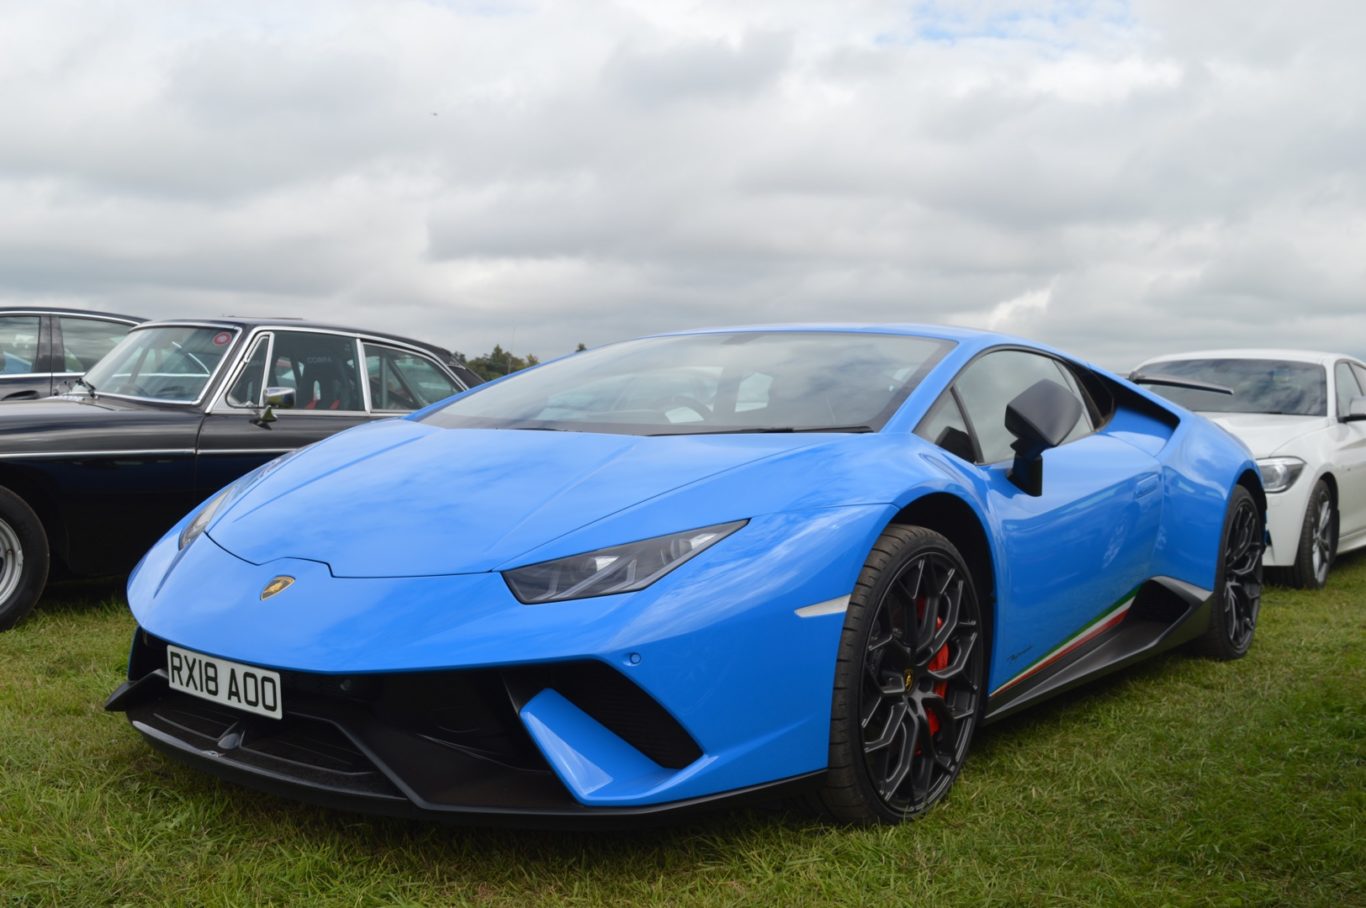 Awkwardly placed number plates, supercars, Lamborghini Performante, dailycarblog.com